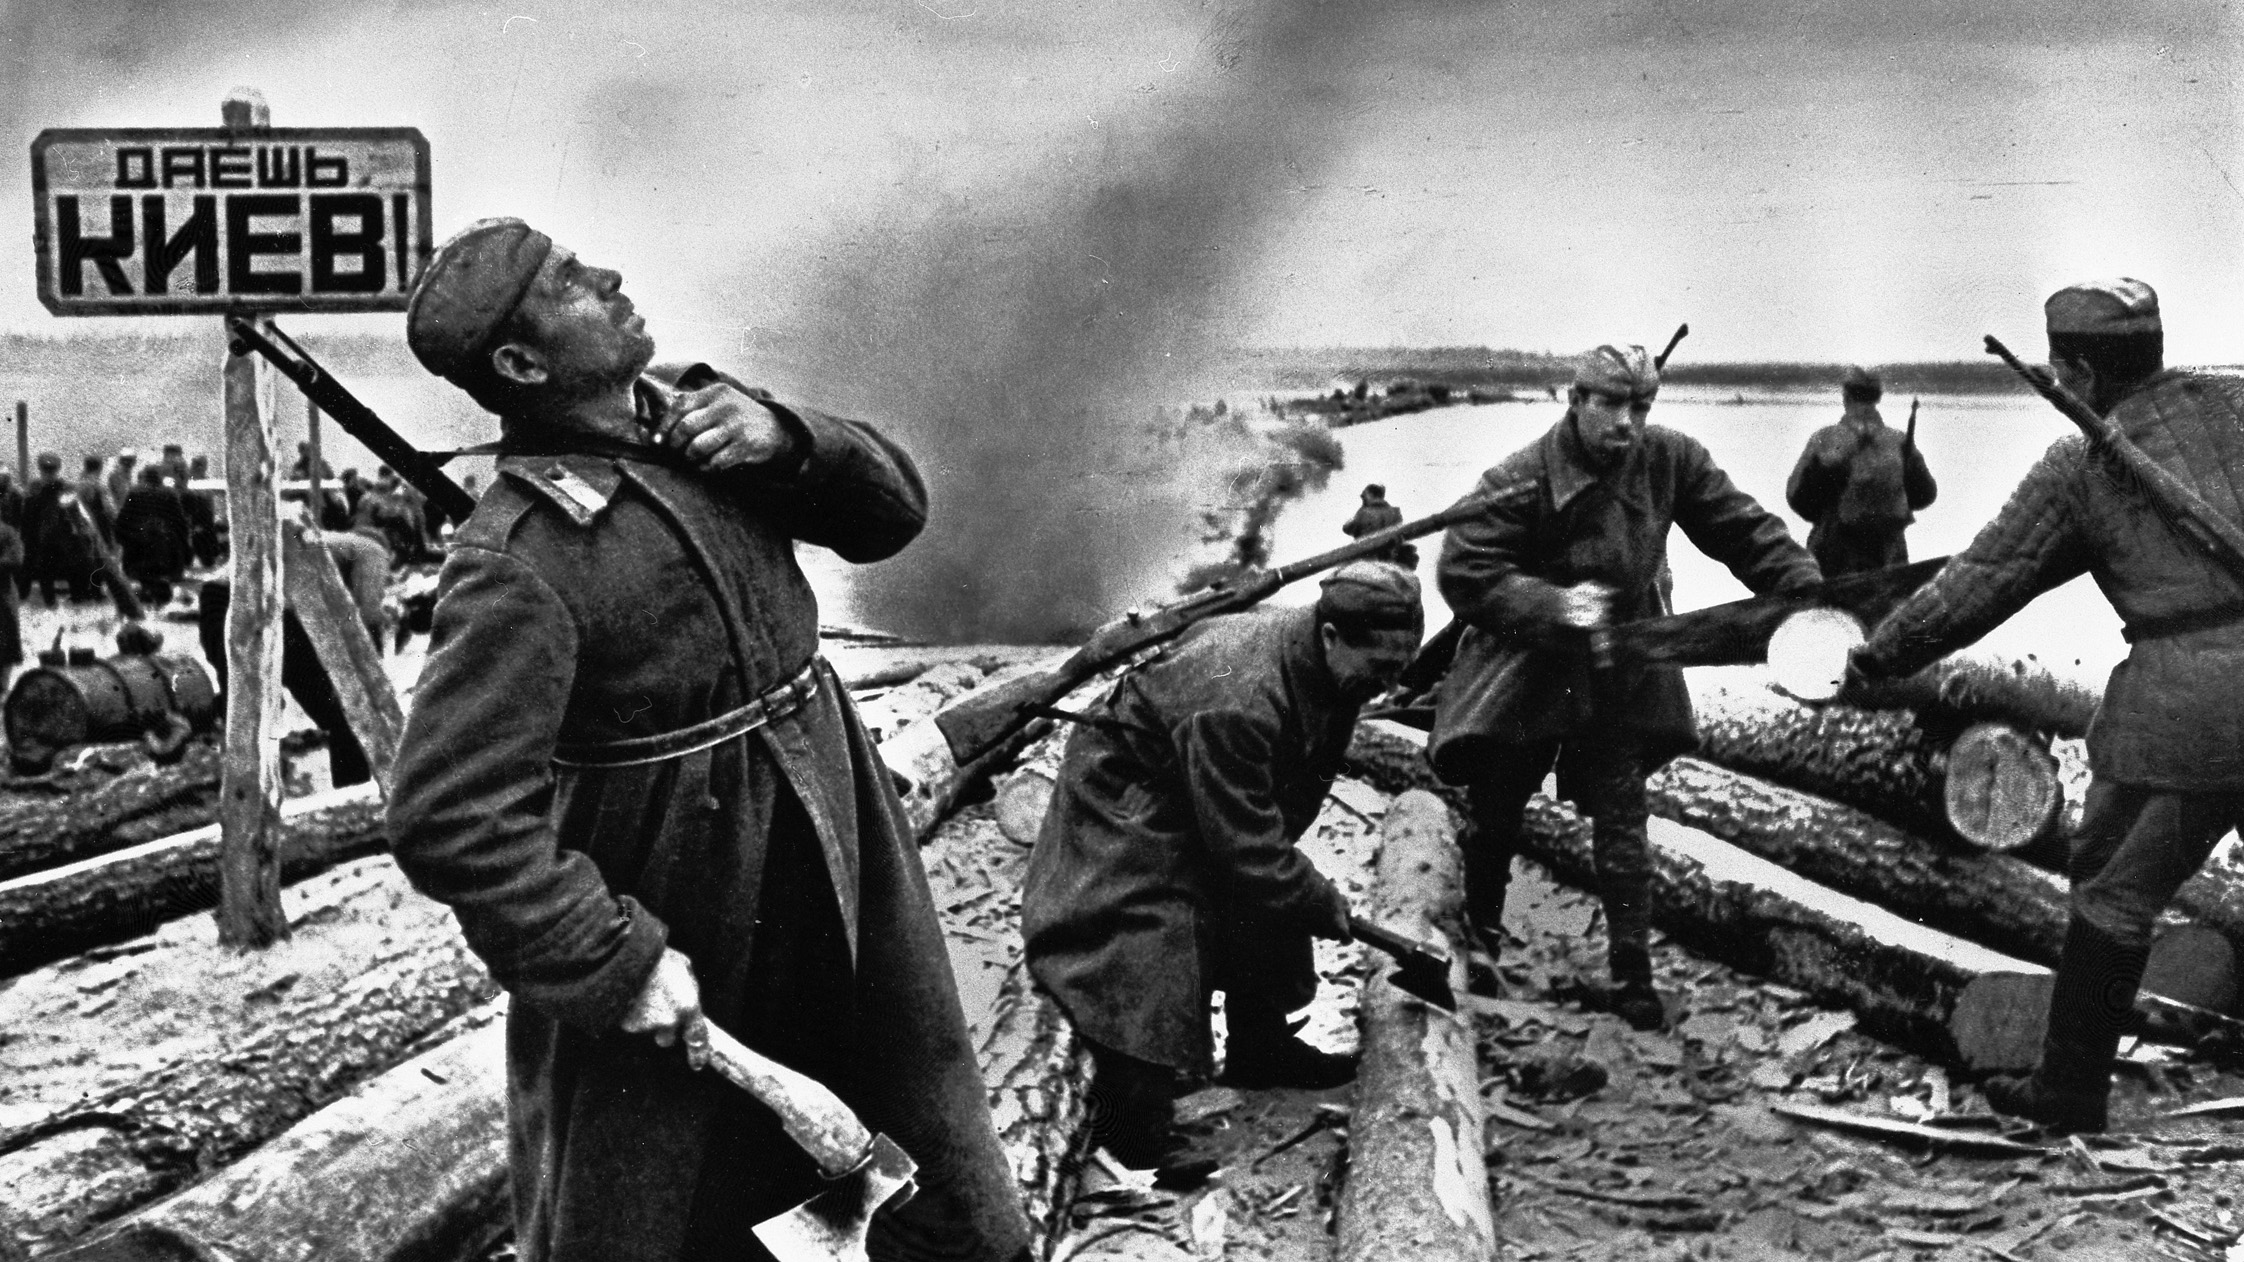 During the fighting around the Ukrainian capital of Kiev, Soviet sappers establish a crossing of the Dnepr River. One of the sappers is looking skyward in response to noise from approaching aircraft.